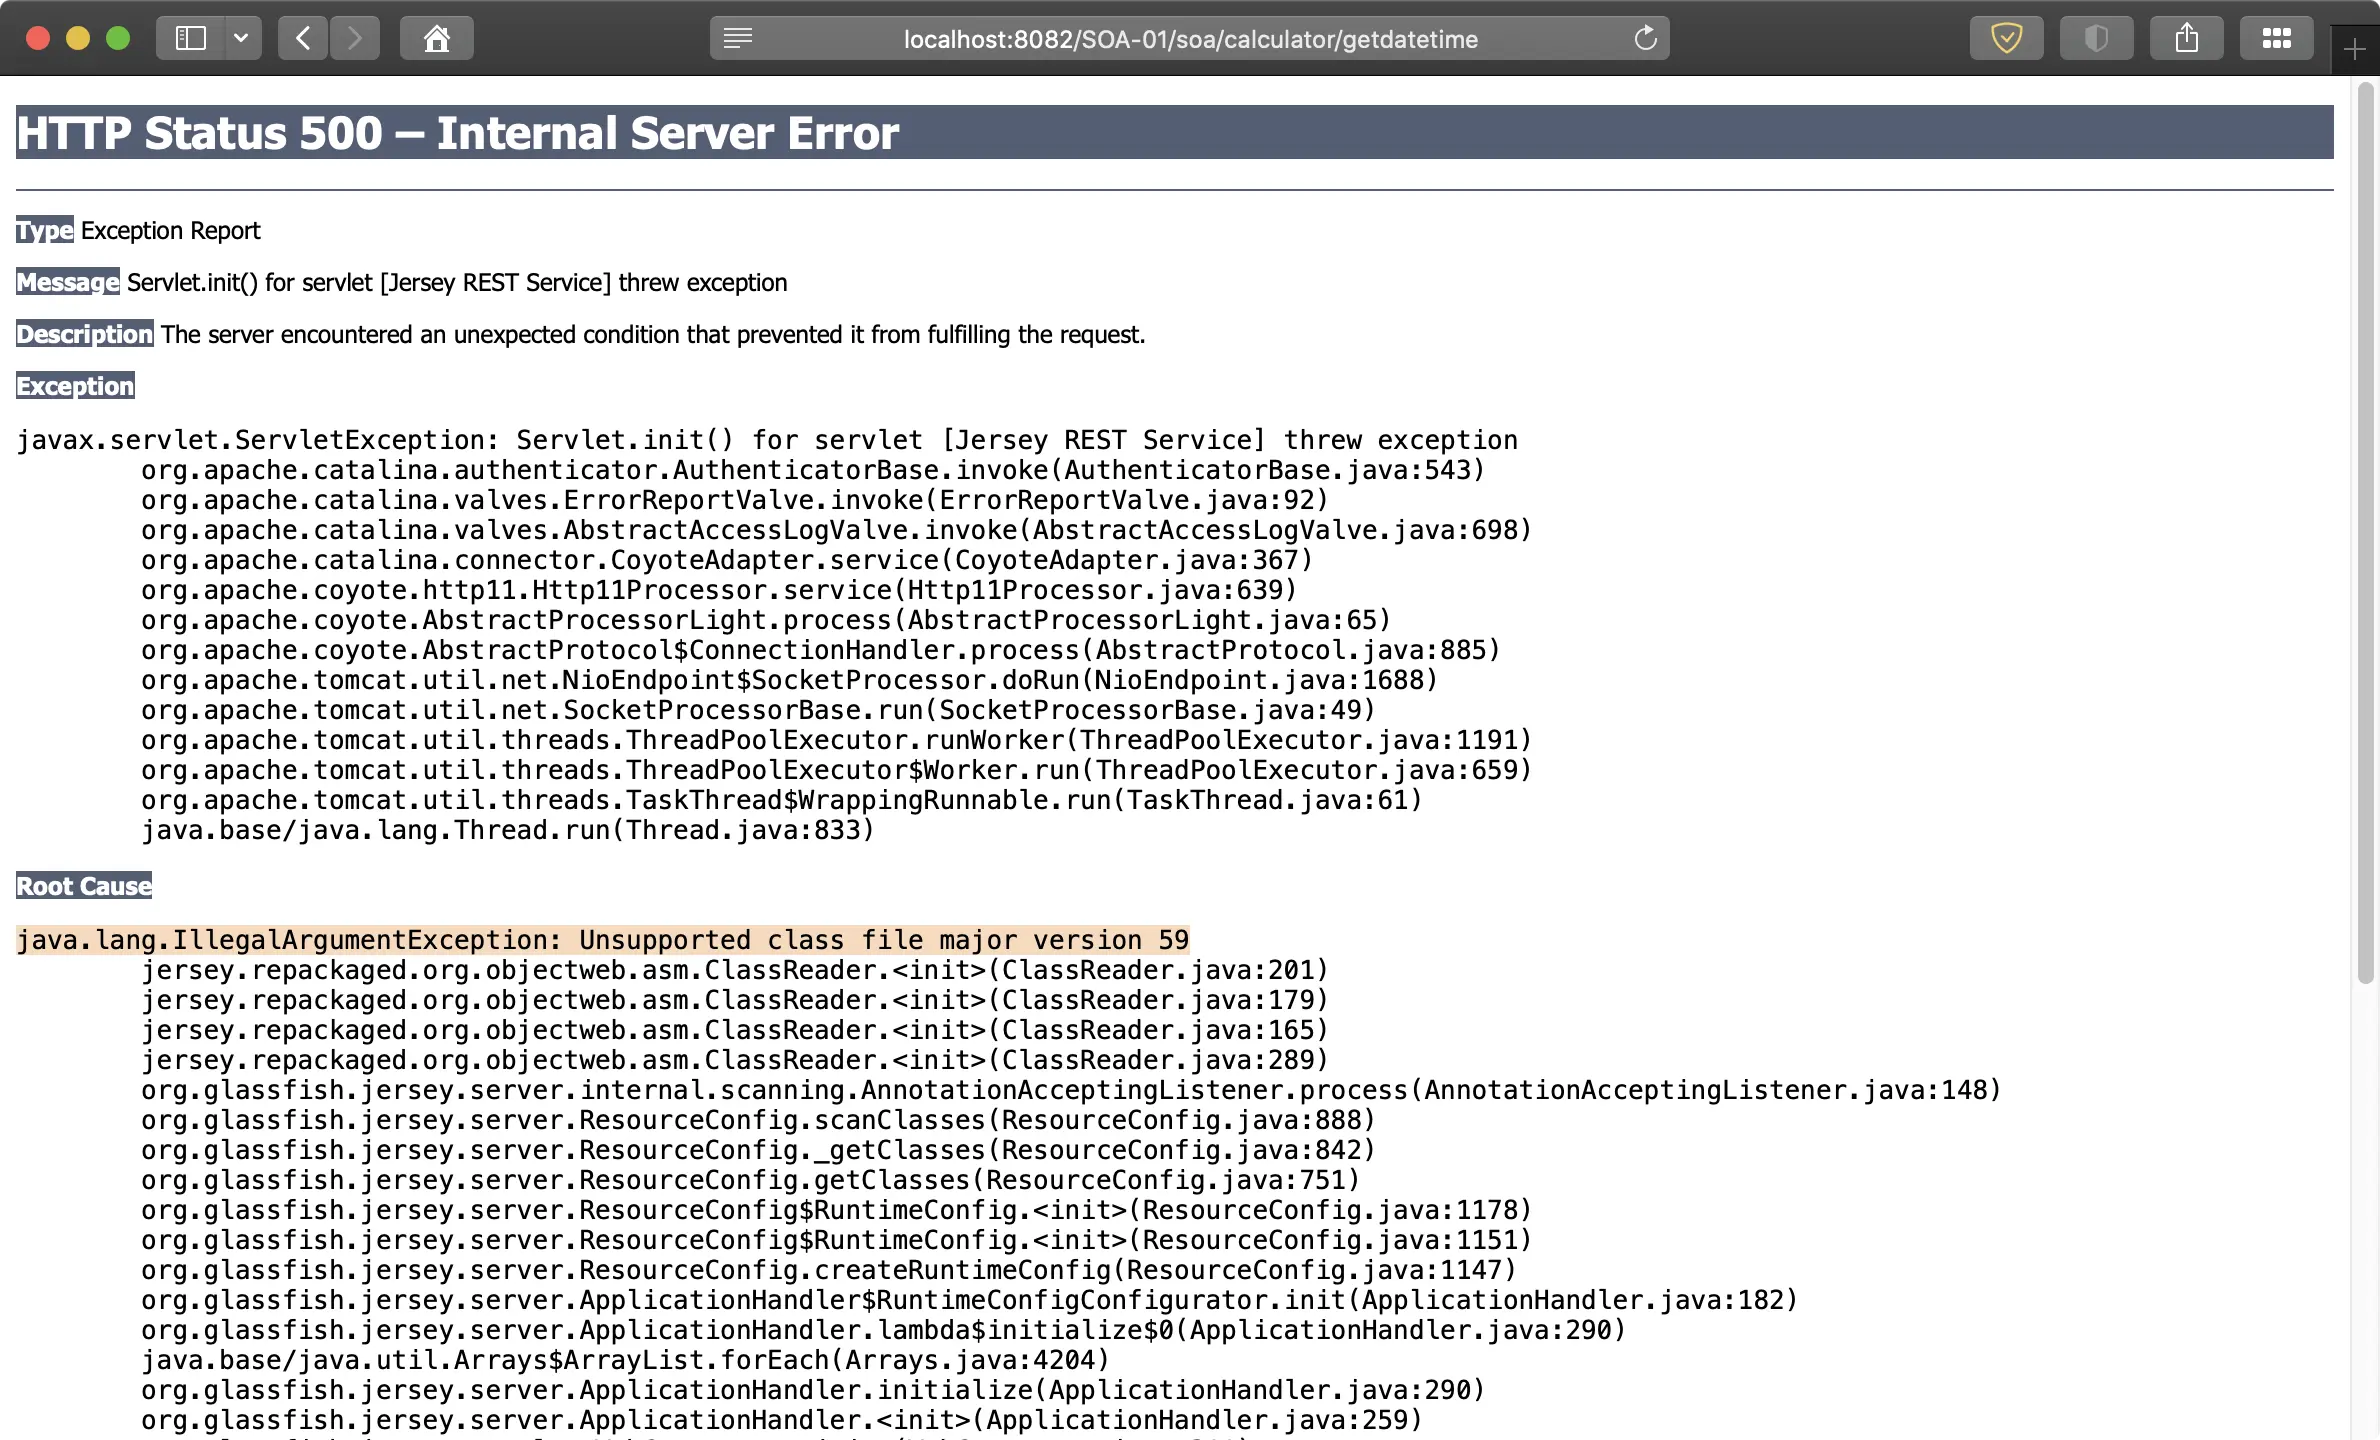 Fig 16a. An internal server error caused by java.lang.IllegalArgumentException exception